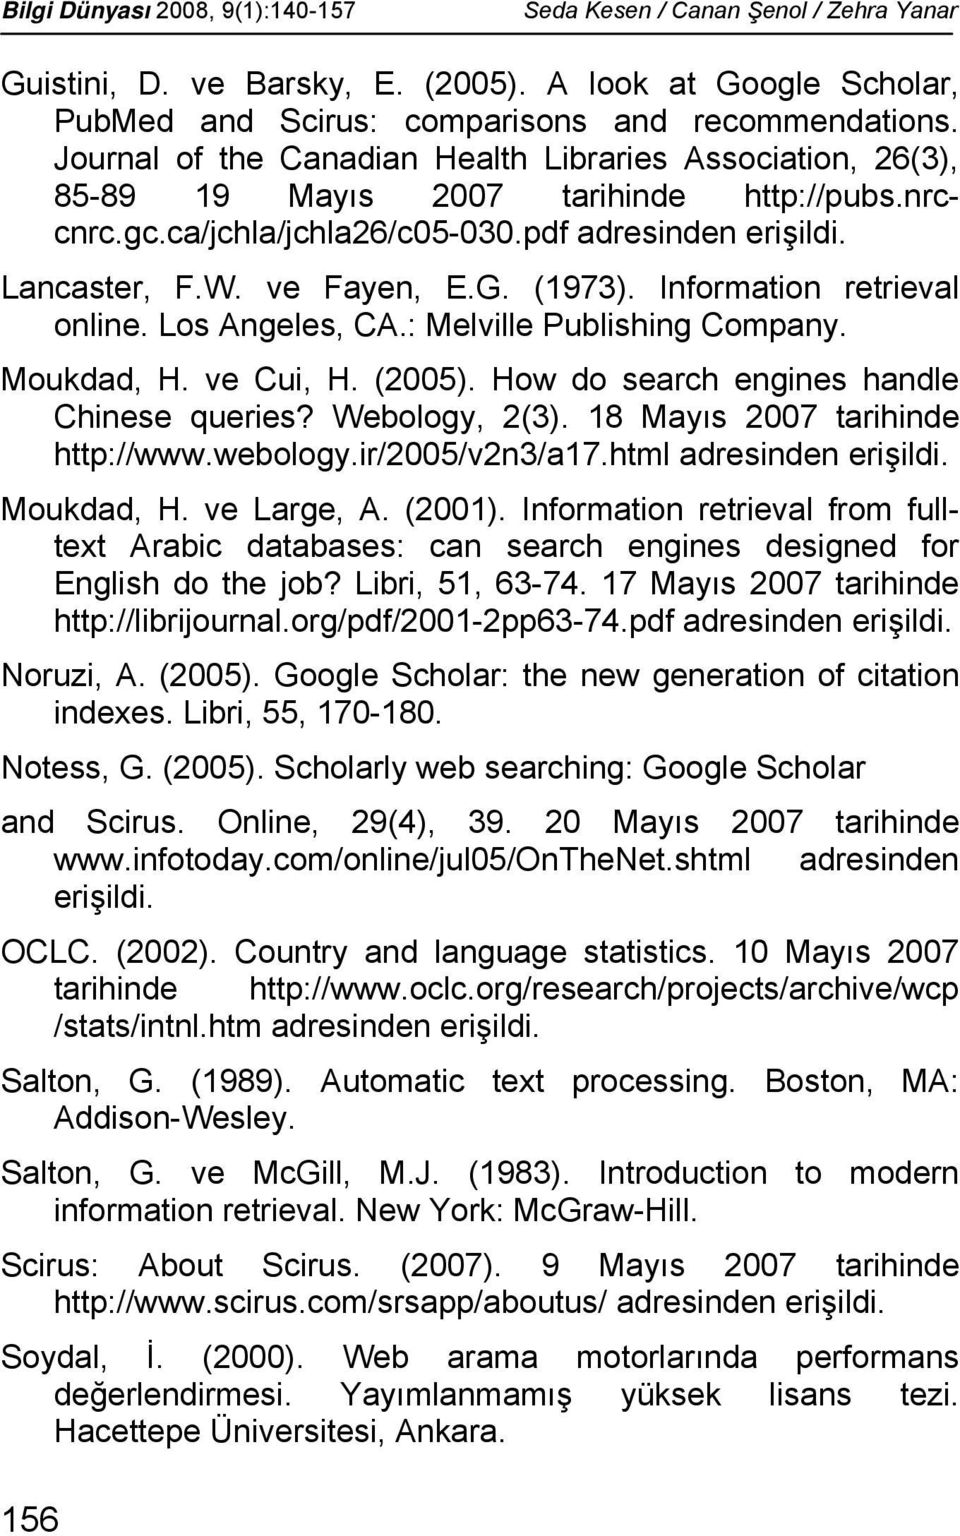 (1973). Information retrieval online. Los Angeles, CA.: Melville Publishing Company. Moukdad, H. ve Cui, H. (2005). How do search engines handle Chinese queries? Webology, 2(3).